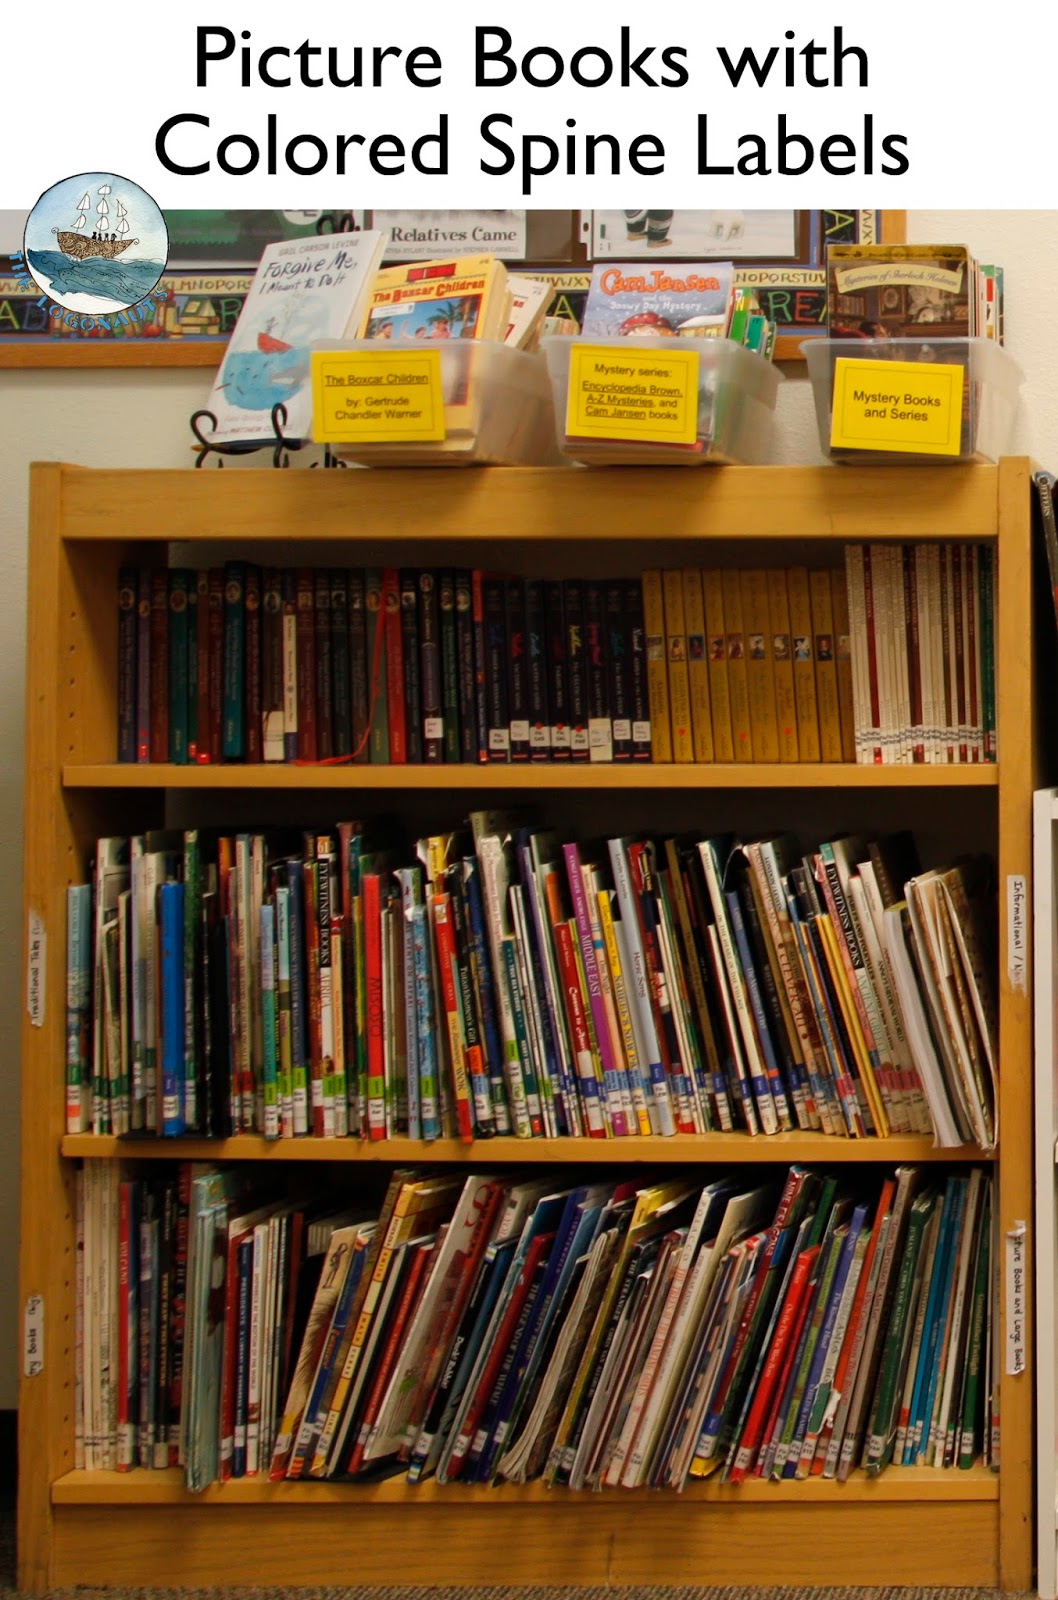 Picture Books with Colored Spine Labels - Organizing the Classroom Library | The Logonauts